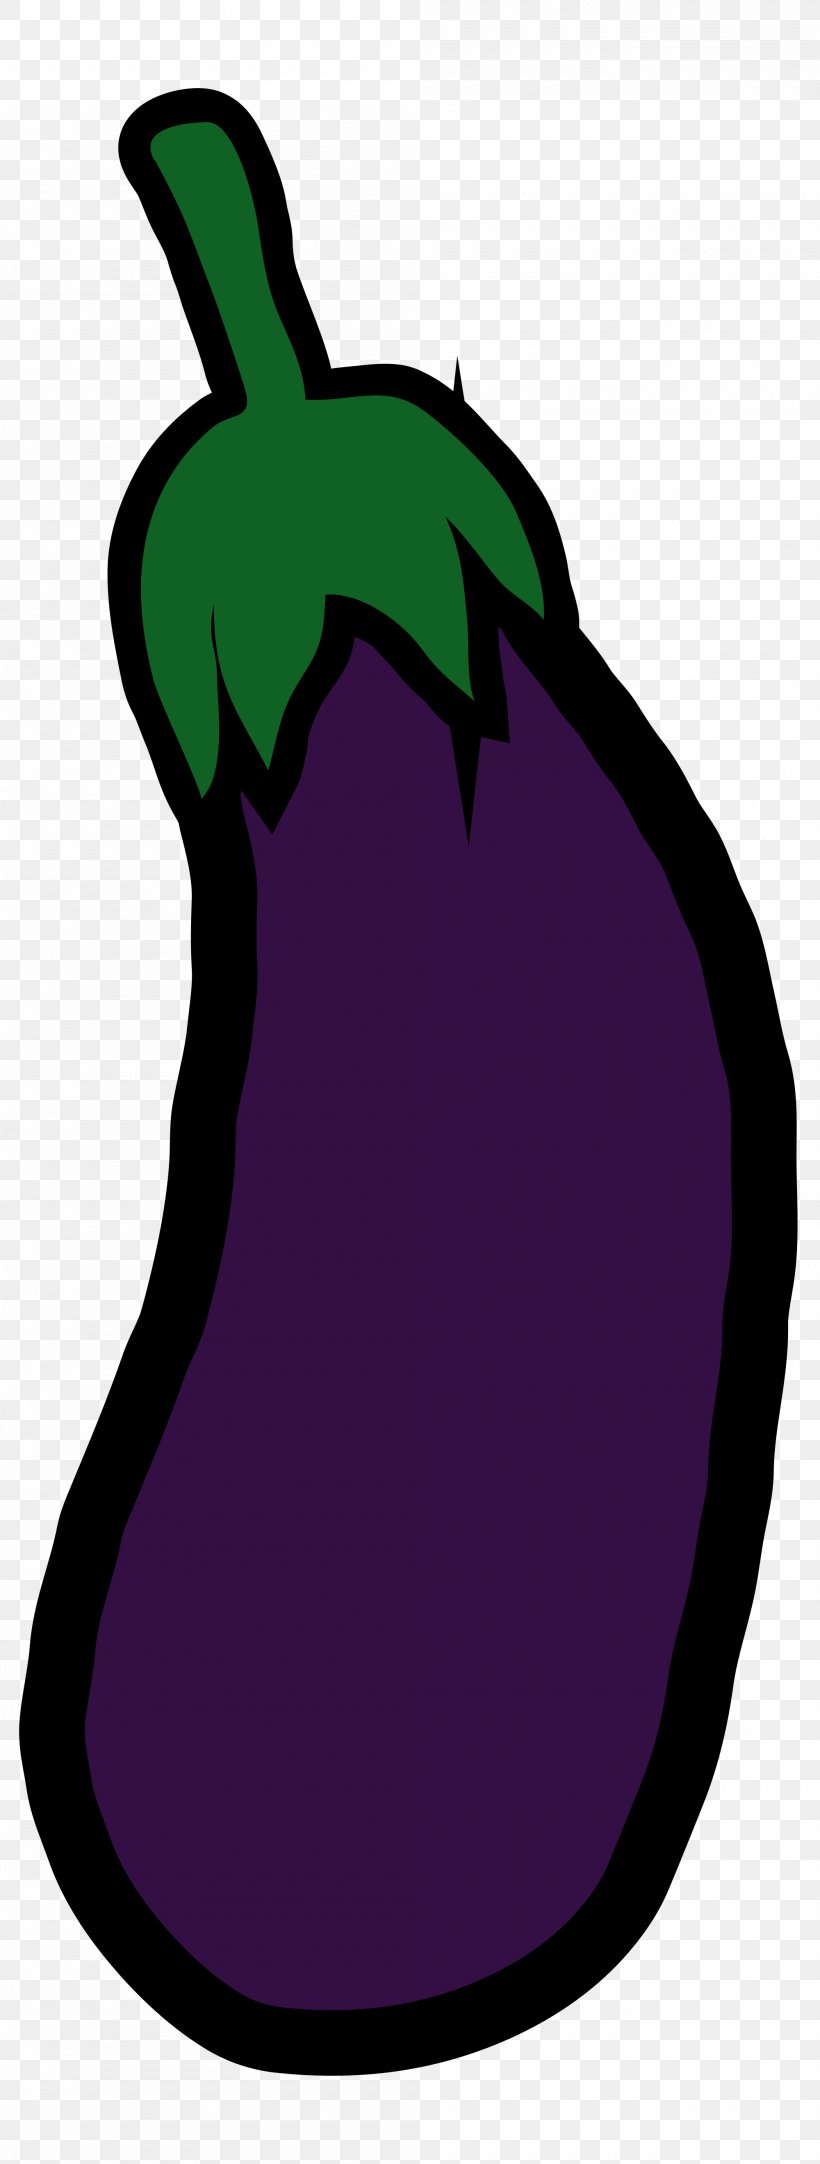 Aubergines Clip Art Kuku Vegetable Produce, PNG, 2000x5280px, Aubergines, Eggplant, Fictional Character, Kuku, Plant Download Free